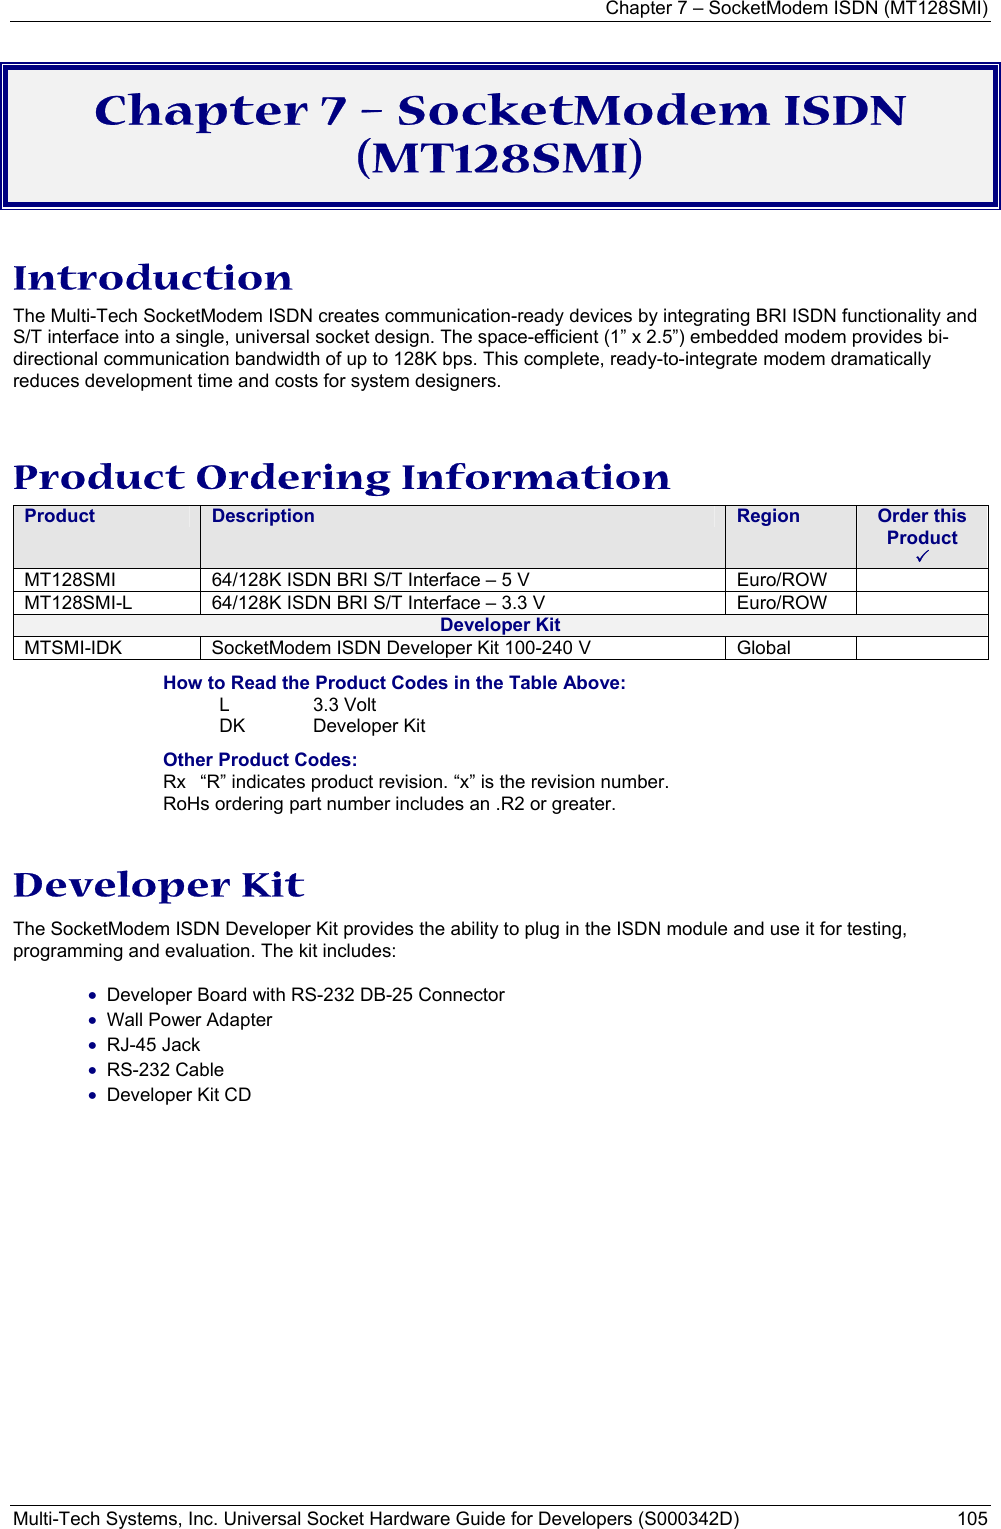 Chapter 7 – SocketModem ISDN (MT128SMI) Multi-Tech Systems, Inc. Universal Socket Hardware Guide for Developers (S000342D)  105  Chapter 7 – SocketModem ISDN (MT128SMI) Introduction The Multi-Tech SocketModem ISDN creates communication-ready devices by integrating BRI ISDN functionality and S/T interface into a single, universal socket design. The space-efficient (1” x 2.5”) embedded modem provides bi-directional communication bandwidth of up to 128K bps. This complete, ready-to-integrate modem dramatically reduces development time and costs for system designers.   Product Ordering Information Product  Description  Region  Order this Product   3 MT128SMI  64/128K ISDN BRI S/T Interface – 5 V     Euro/ROW   MT128SMI-L  64/128K ISDN BRI S/T Interface – 3.3 V       Euro/ROW   Developer Kit MTSMI-IDK  SocketModem ISDN Developer Kit 100-240 V  Global   How to Read the Product Codes in the Table Above: L 3.3 Volt  DK Developer Kit Other Product Codes: Rx  “R” indicates product revision. “x” is the revision number. RoHs ordering part number includes an .R2 or greater.  Developer Kit The SocketModem ISDN Developer Kit provides the ability to plug in the ISDN module and use it for testing, programming and evaluation. The kit includes:  • Developer Board with RS-232 DB-25 Connector • Wall Power Adapter • RJ-45 Jack • RS-232 Cable • Developer Kit CD  